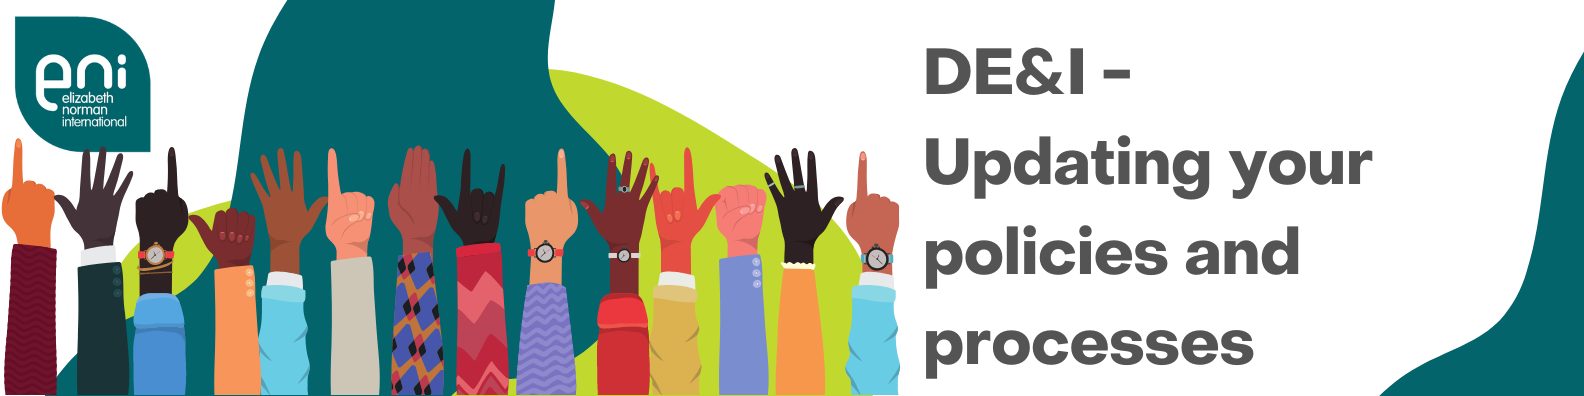 DE&I – 7 tips to creating inclusive policies and processes featured image